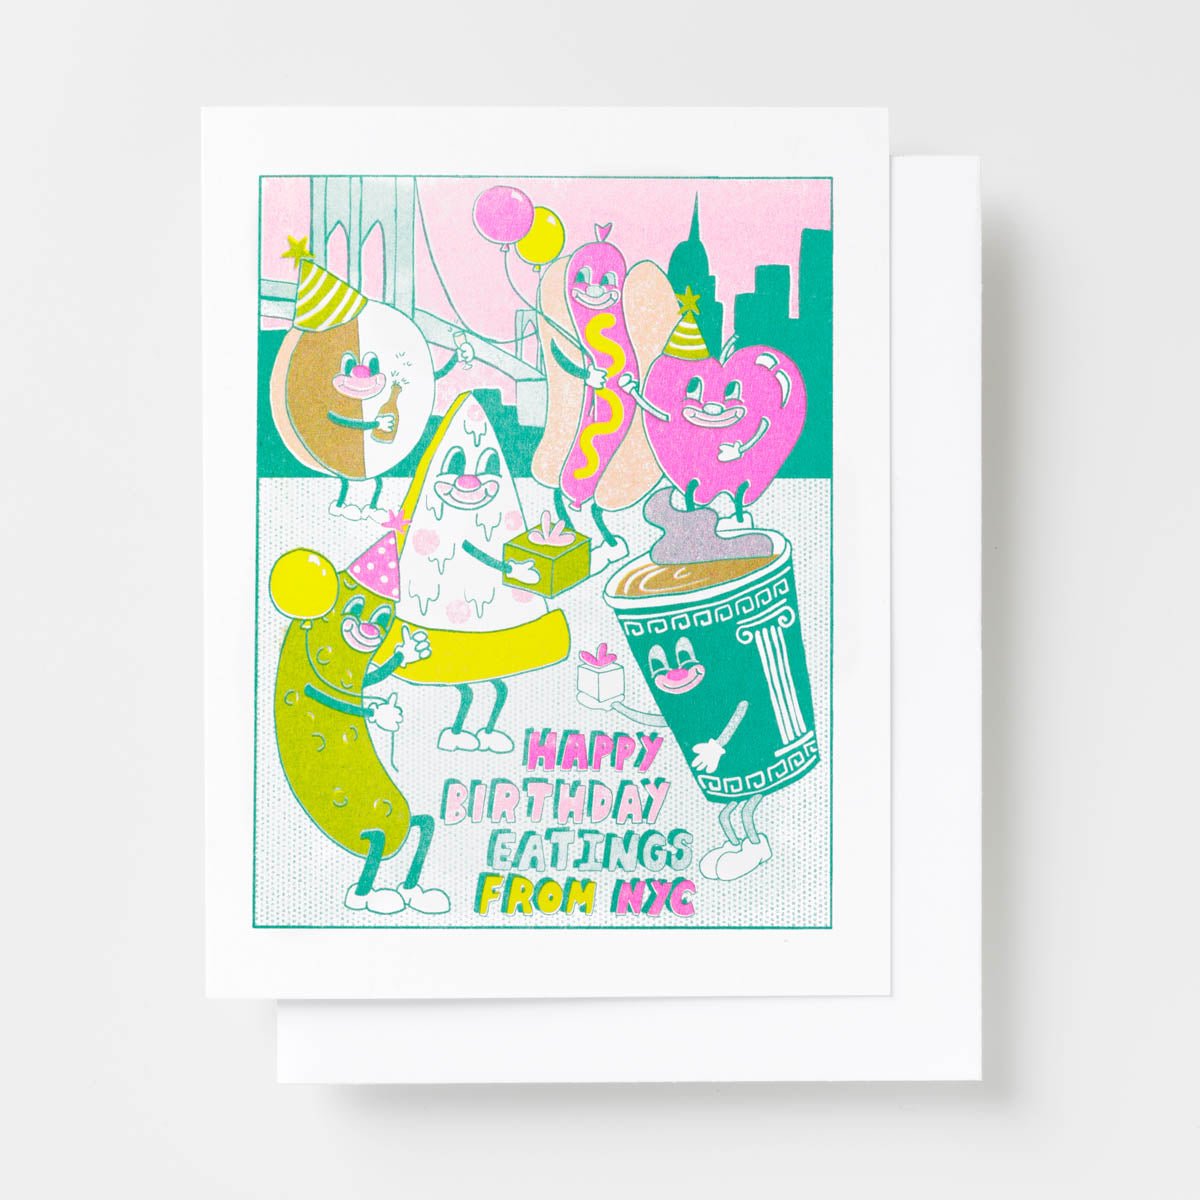 NYC Birthday Eatings - Risograph Card - Yellow Owl Workshop